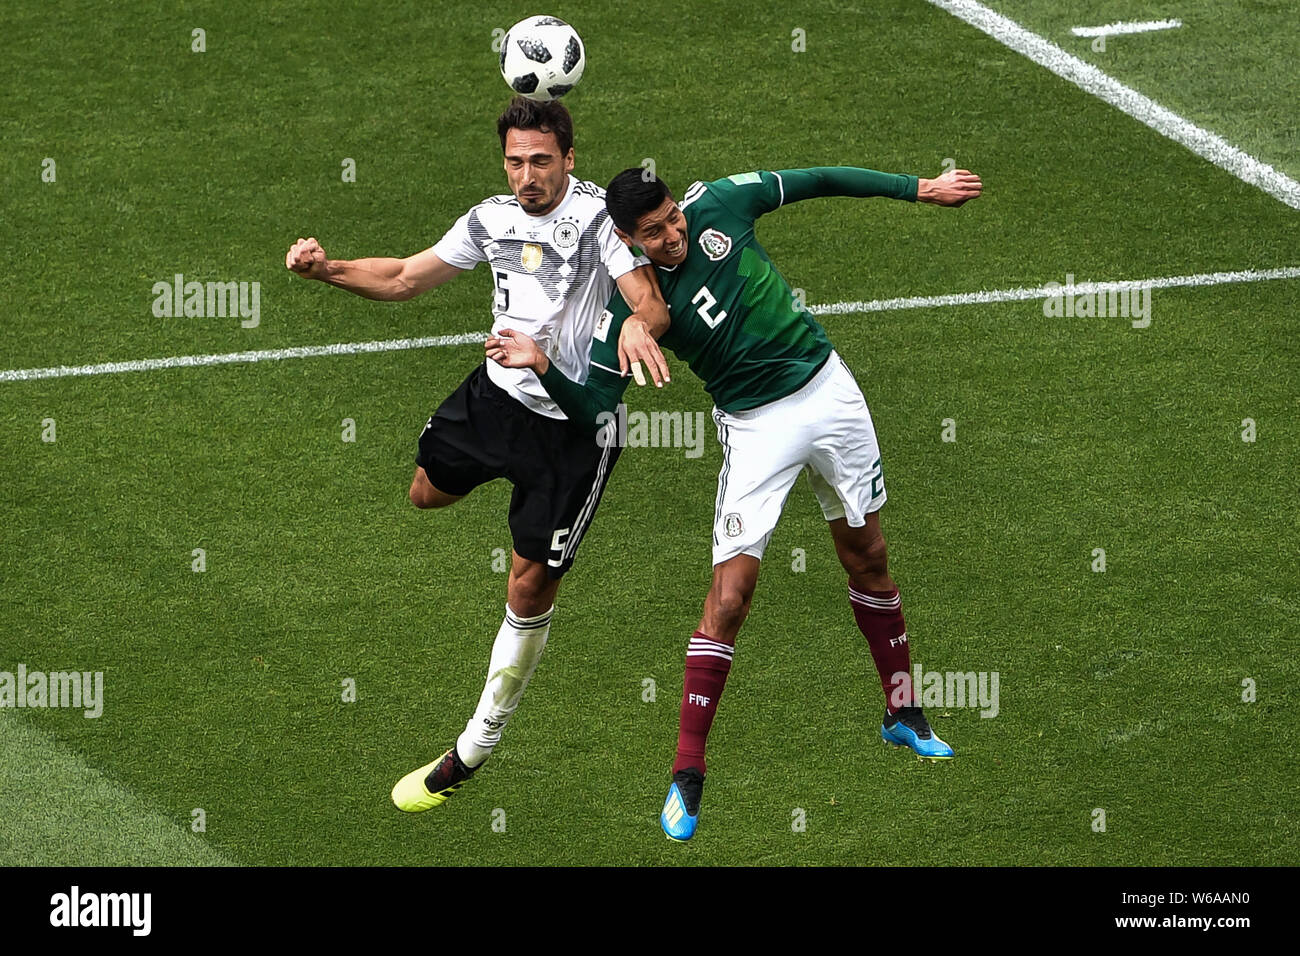 Hugo Ayala of Mexico, right, challenges Mats Hummels of Germany in their Group F match during the FIFA World Cup 2018 in Moscow, Russia, 17 June 2018. Stock Photo